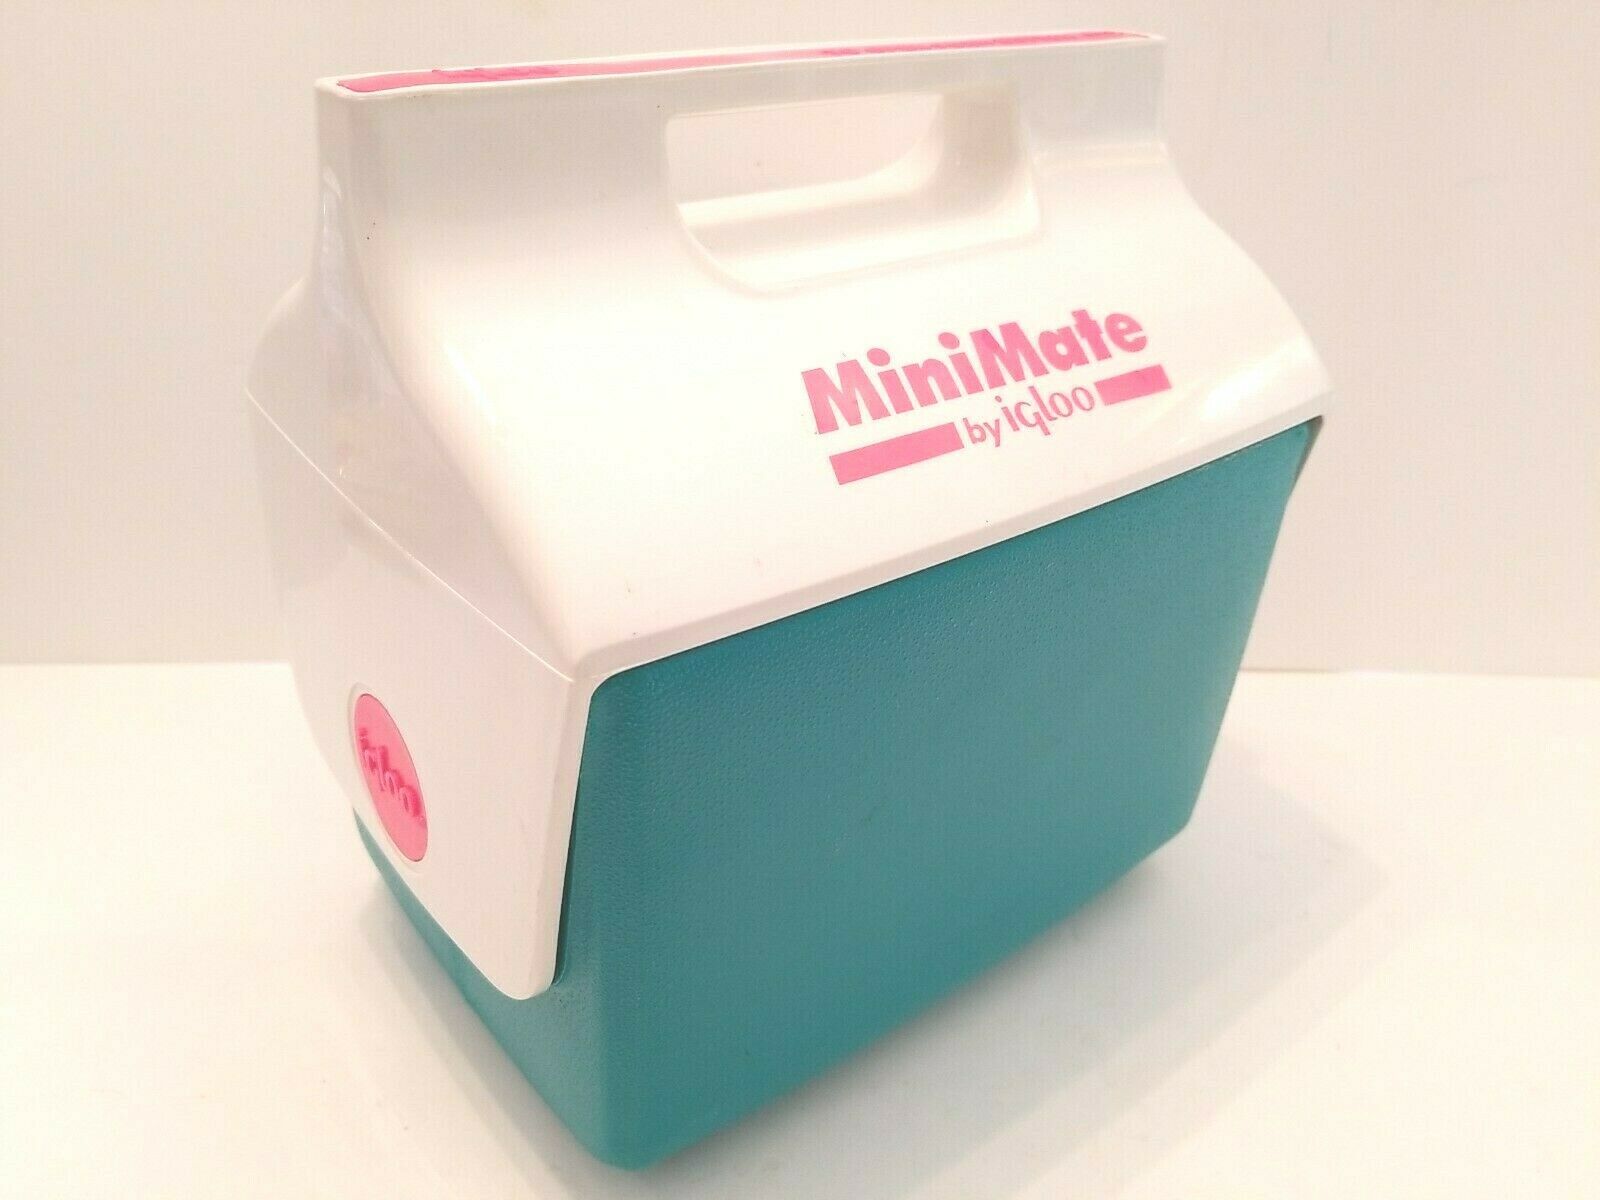 Primary image for Mini Mate Igloo Cooler VTG 1992 Retro Hot Pink Neon Teal Camp Hunt Fish Ice Box